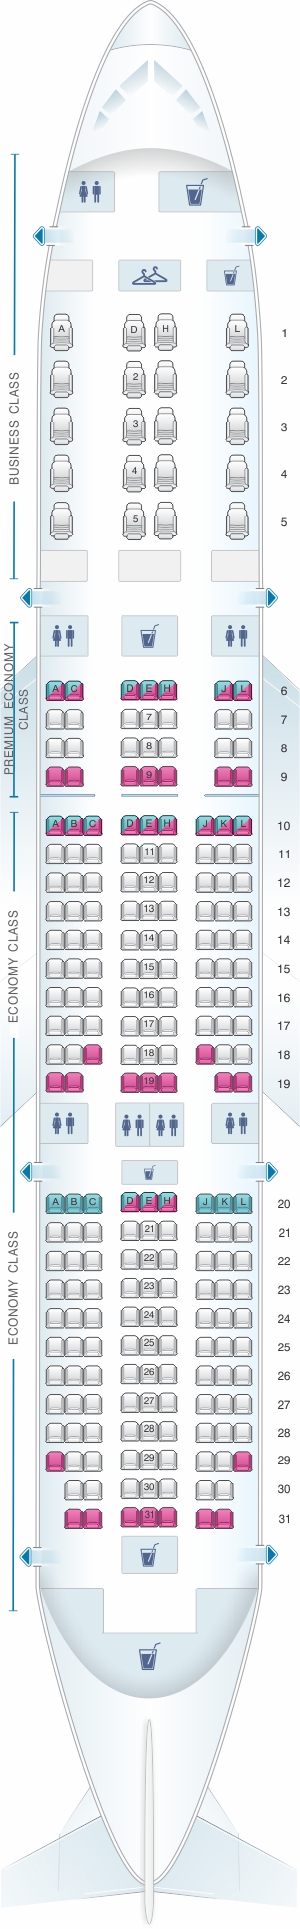 Seat map for American Airlines Boeing B787-8 config.2